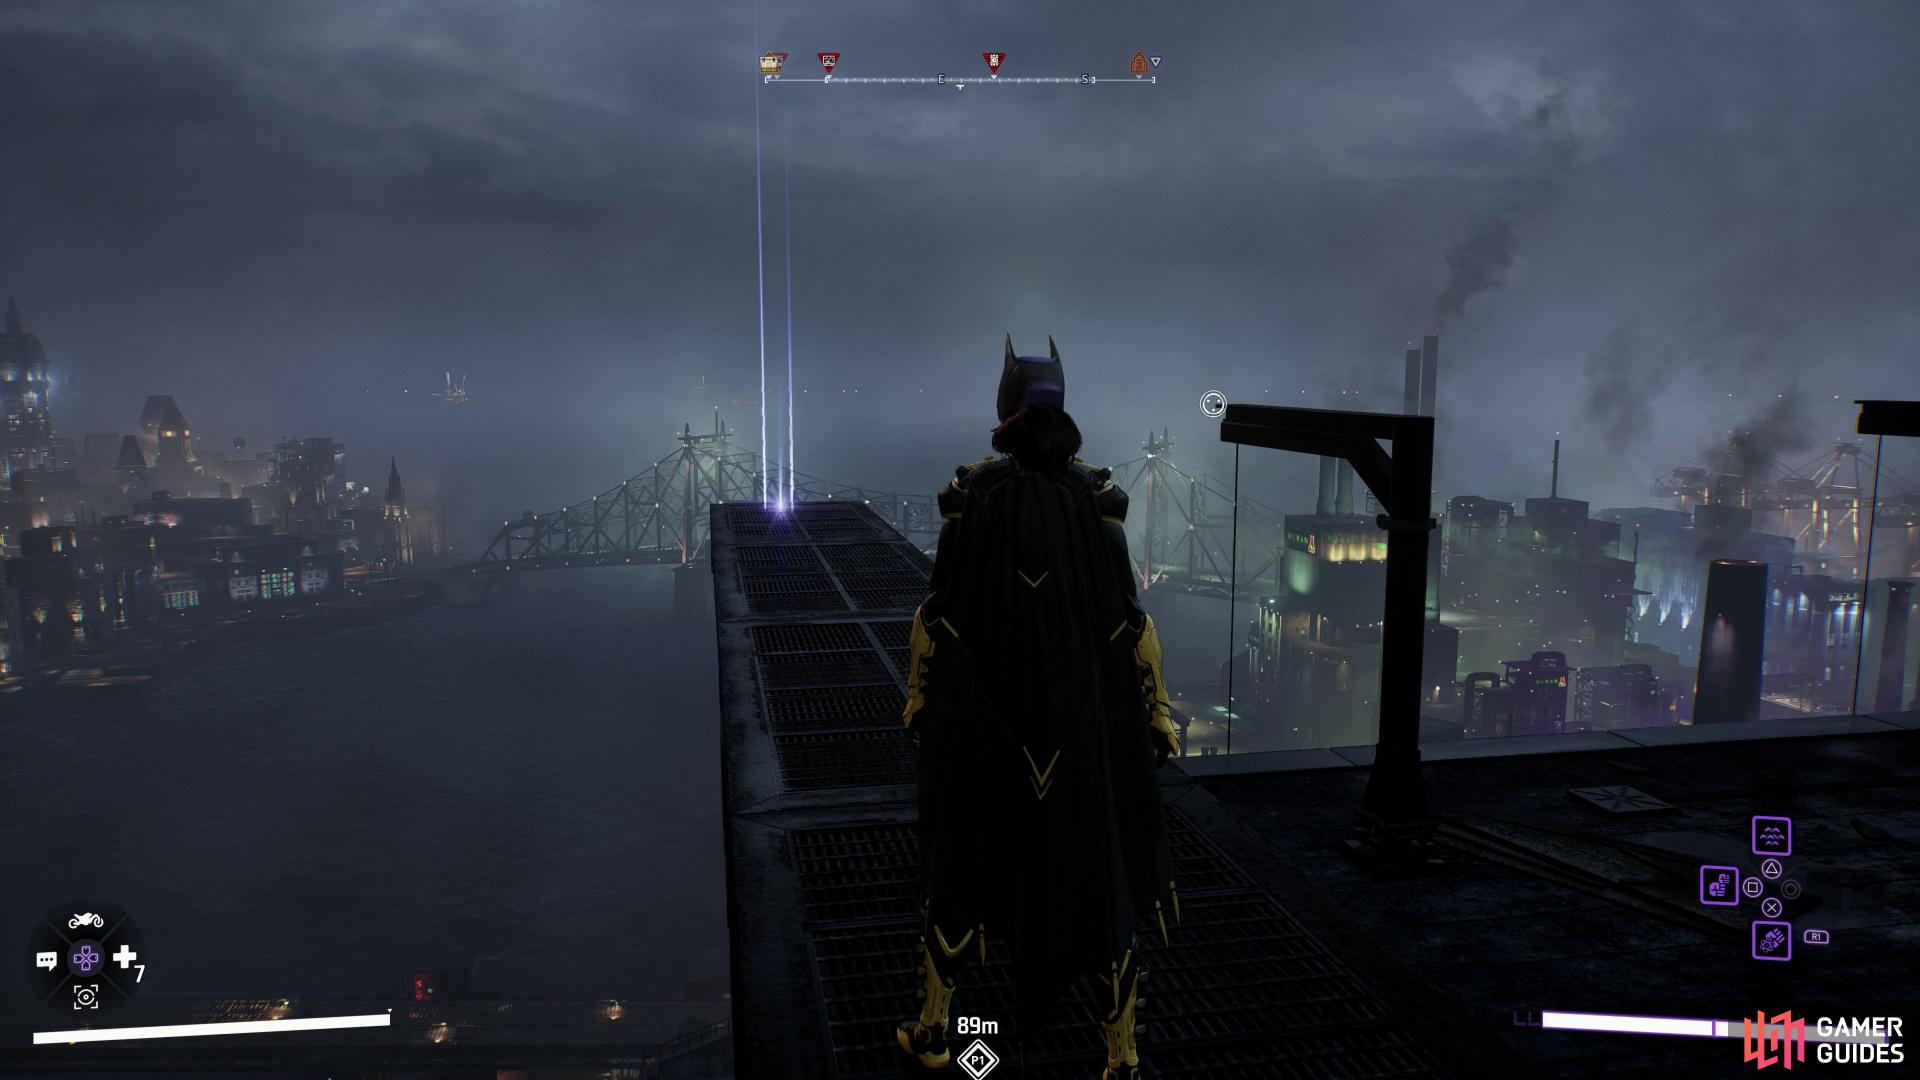 The Batarang located atop the STAGG Building